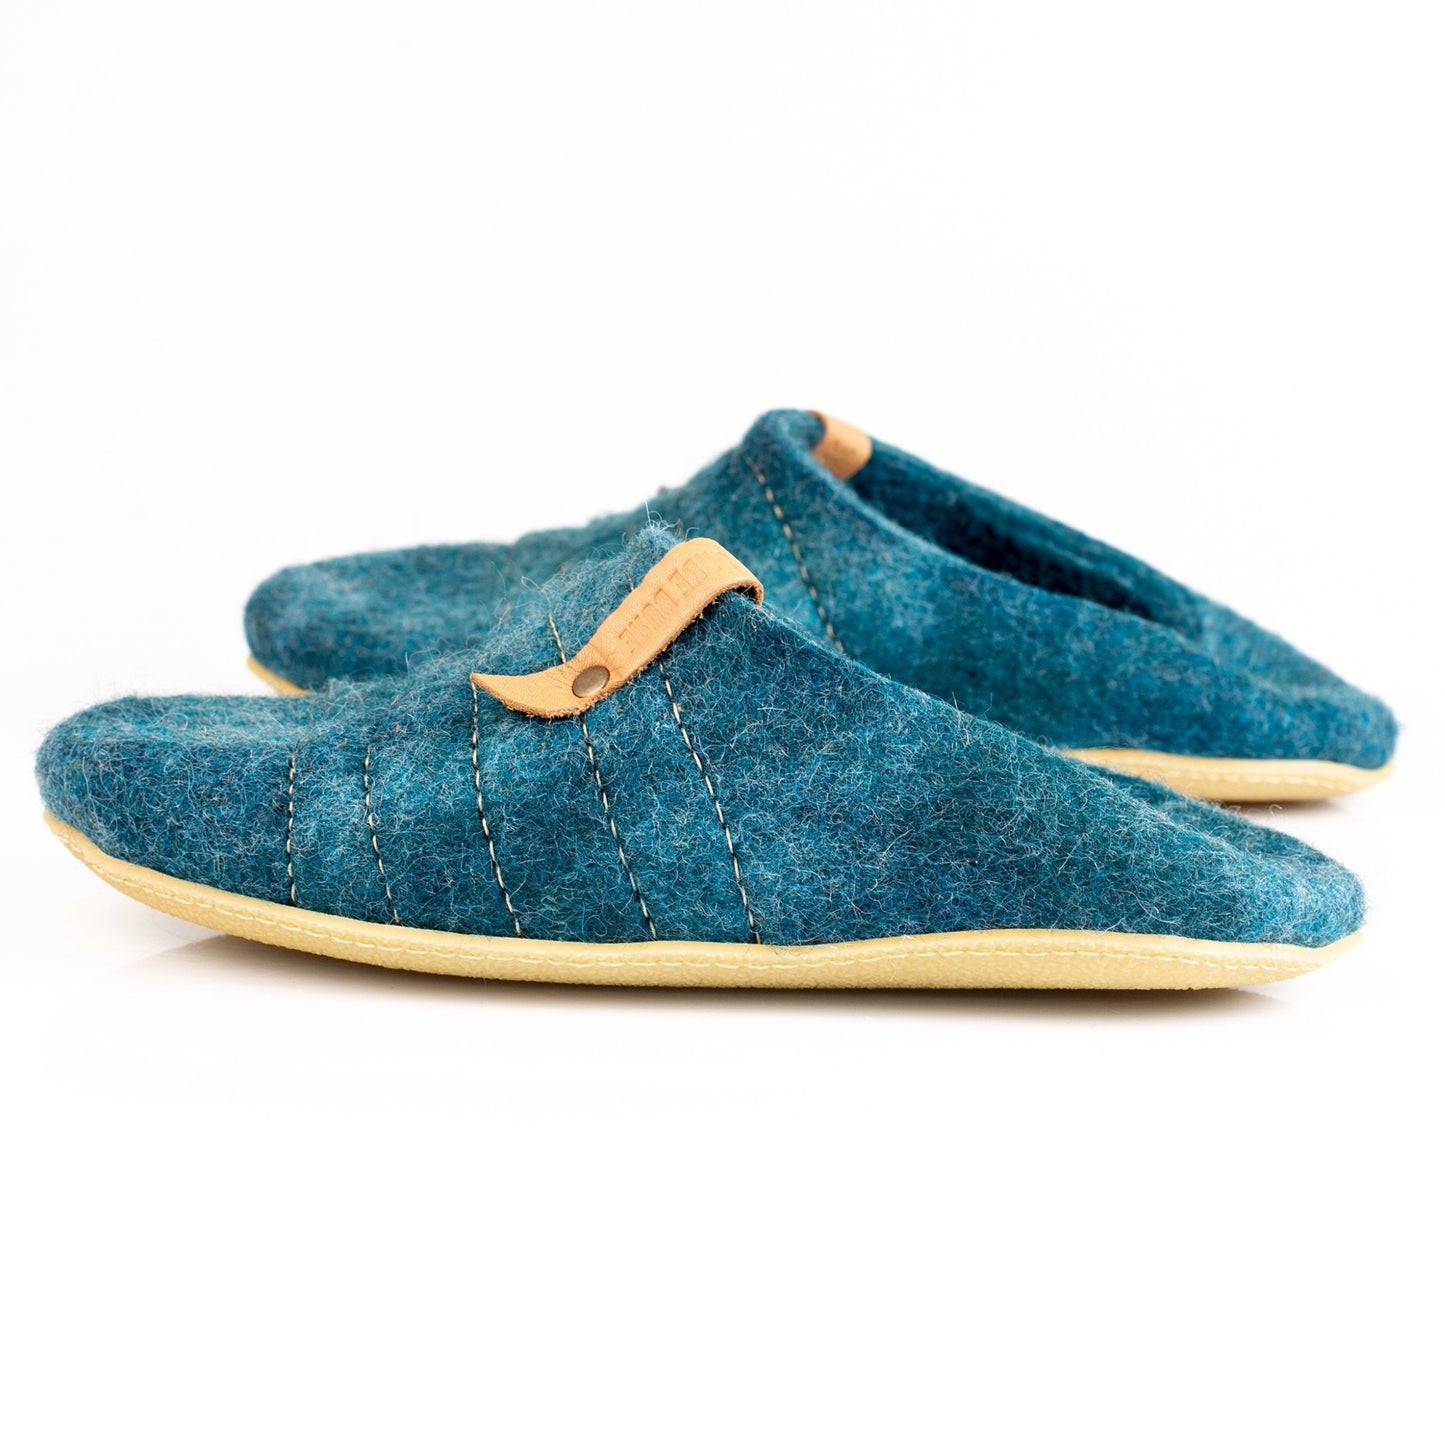 Fresh ocean color collapsible Felted Slippers - backless slippers that turn into woolen clogs